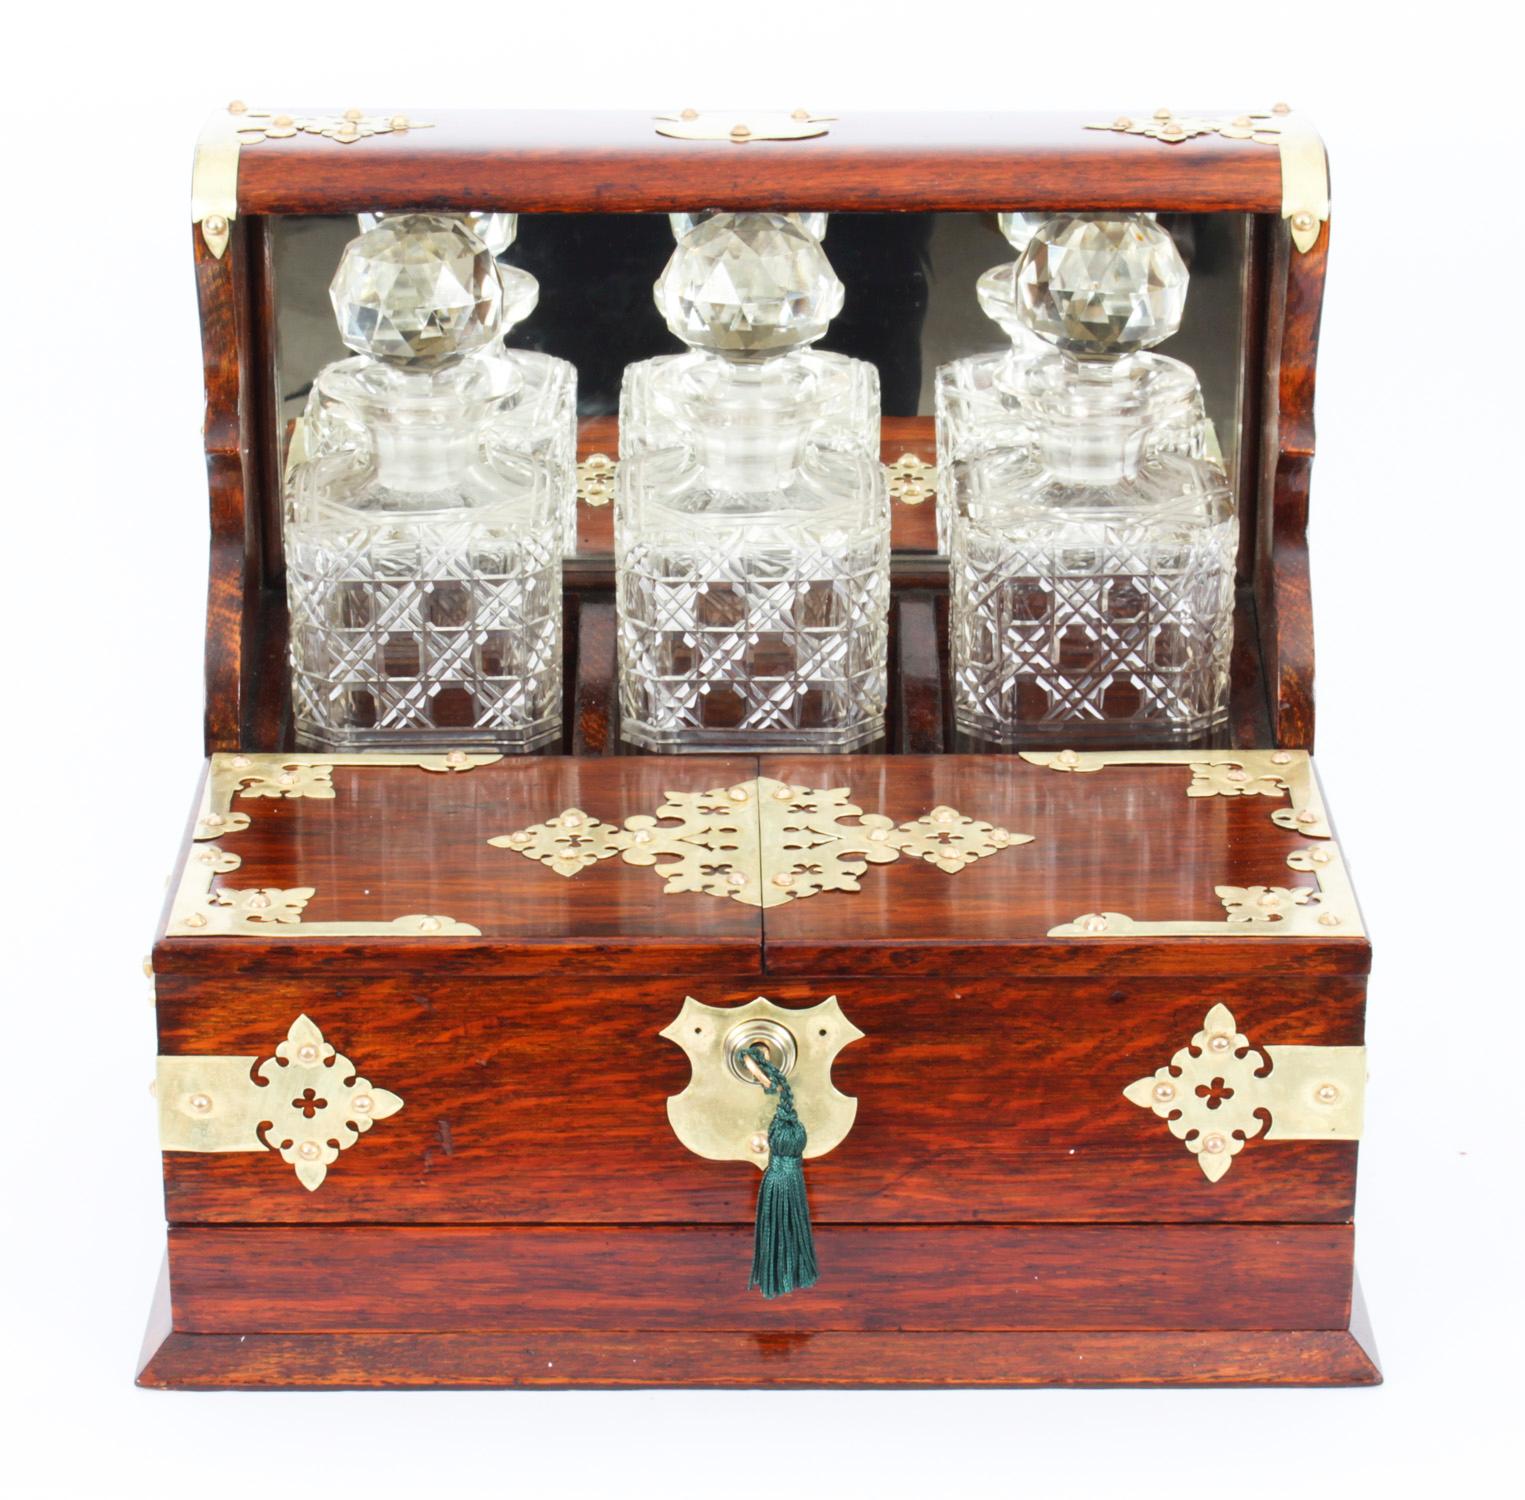 This is a superb antique Victorian oak cased three decanter tantalus with decorative silver plated cut brass gothic revival mounts and carry handles to the sides, circa 1880 in date.

This magnificent tantalus features three wonderful hobnail cut